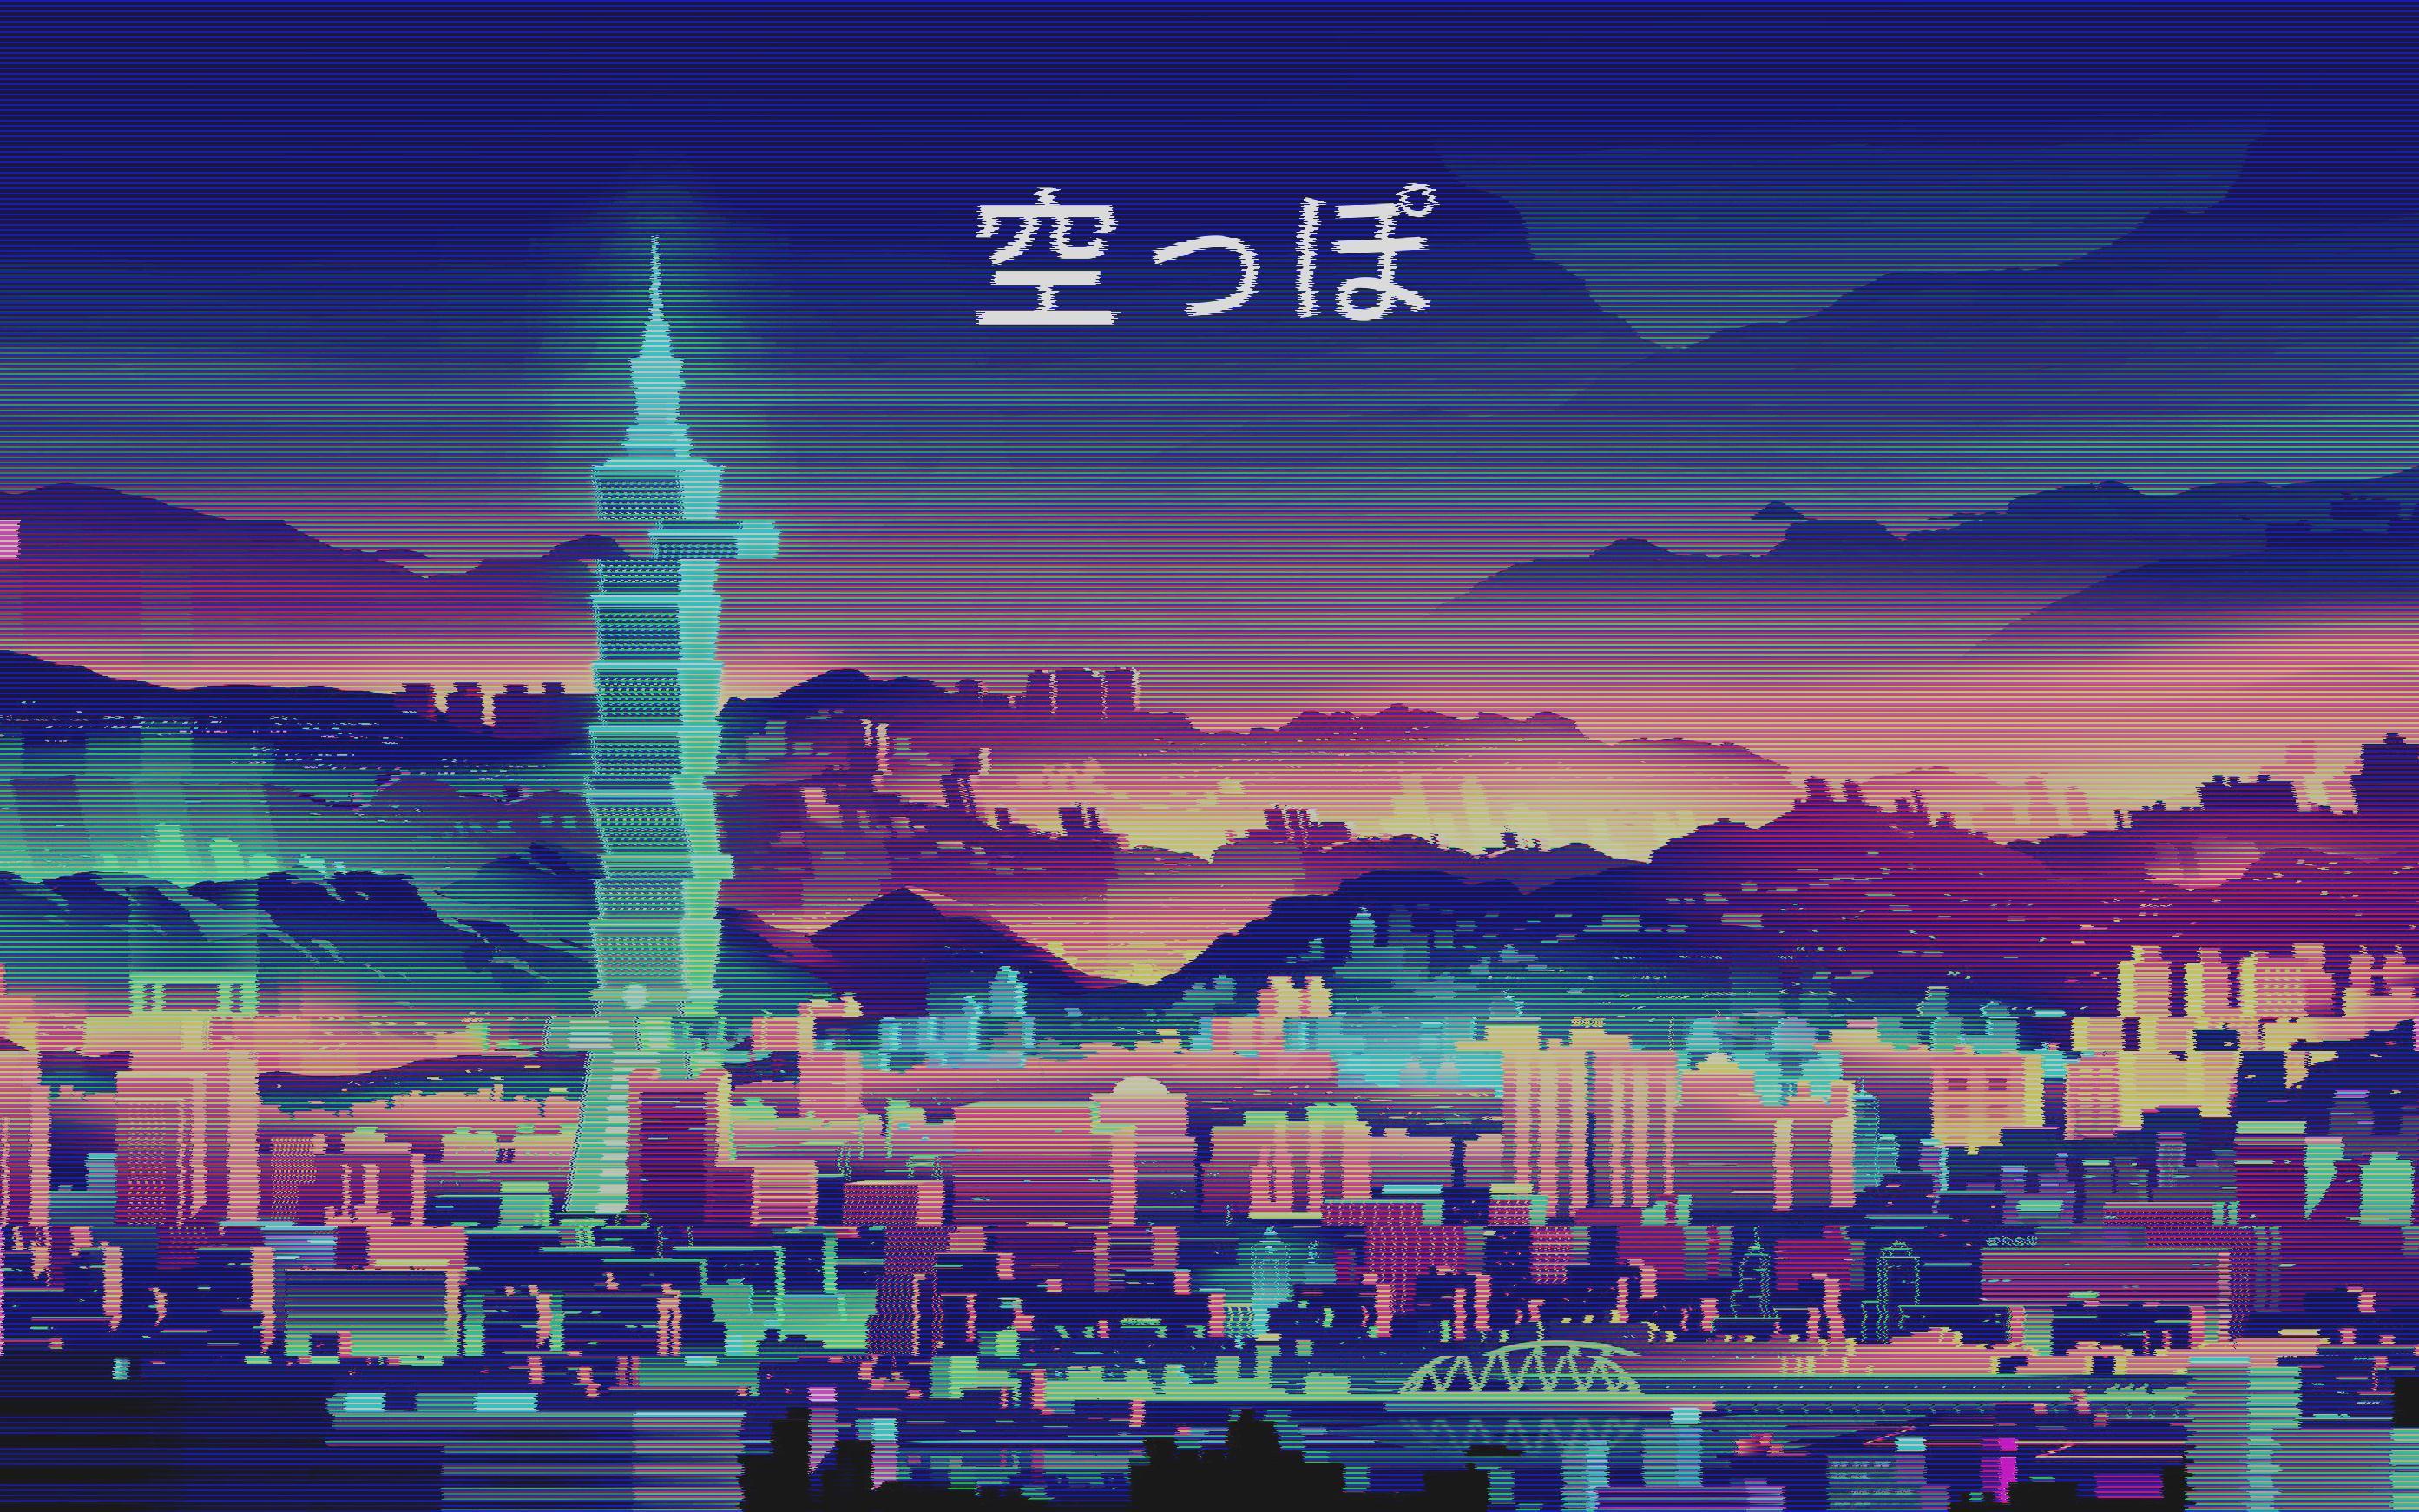 Japanese > English What does this wallpaper say?